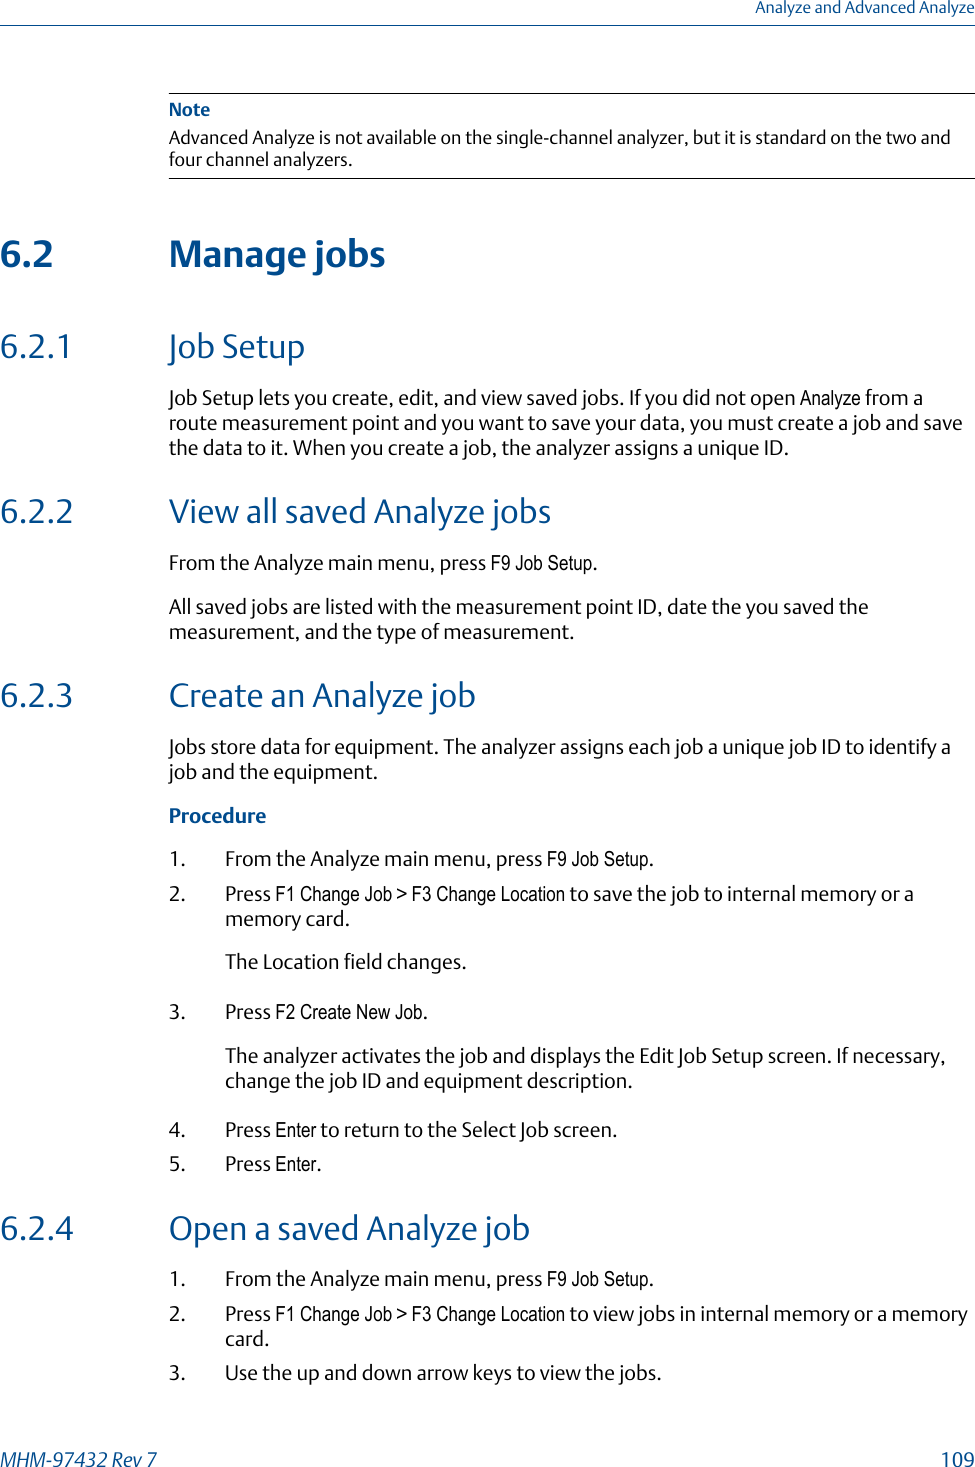 NoteAdvanced Analyze is not available on the single-channel analyzer, but it is standard on the two andfour channel analyzers.6.2 Manage jobs6.2.1 Job SetupJob Setup lets you create, edit, and view saved jobs. If you did not open Analyze from aroute measurement point and you want to save your data, you must create a job and savethe data to it. When you create a job, the analyzer assigns a unique ID.6.2.2 View all saved Analyze jobsFrom the Analyze main menu, press F9 Job Setup.All saved jobs are listed with the measurement point ID, date the you saved themeasurement, and the type of measurement.6.2.3 Create an Analyze jobJobs store data for equipment. The analyzer assigns each job a unique job ID to identify ajob and the equipment.Procedure1. From the Analyze main menu, press F9 Job Setup.2. Press F1 Change Job &gt; F3 Change Location to save the job to internal memory or amemory card.The Location field changes.3. Press F2 Create New Job.The analyzer activates the job and displays the Edit Job Setup screen. If necessary,change the job ID and equipment description.4. Press Enter to return to the Select Job screen.5. Press Enter.6.2.4 Open a saved Analyze job1. From the Analyze main menu, press F9 Job Setup.2. Press F1 Change Job &gt; F3 Change Location to view jobs in internal memory or a memorycard.3. Use the up and down arrow keys to view the jobs.Analyze and Advanced AnalyzeMHM-97432 Rev 7  109